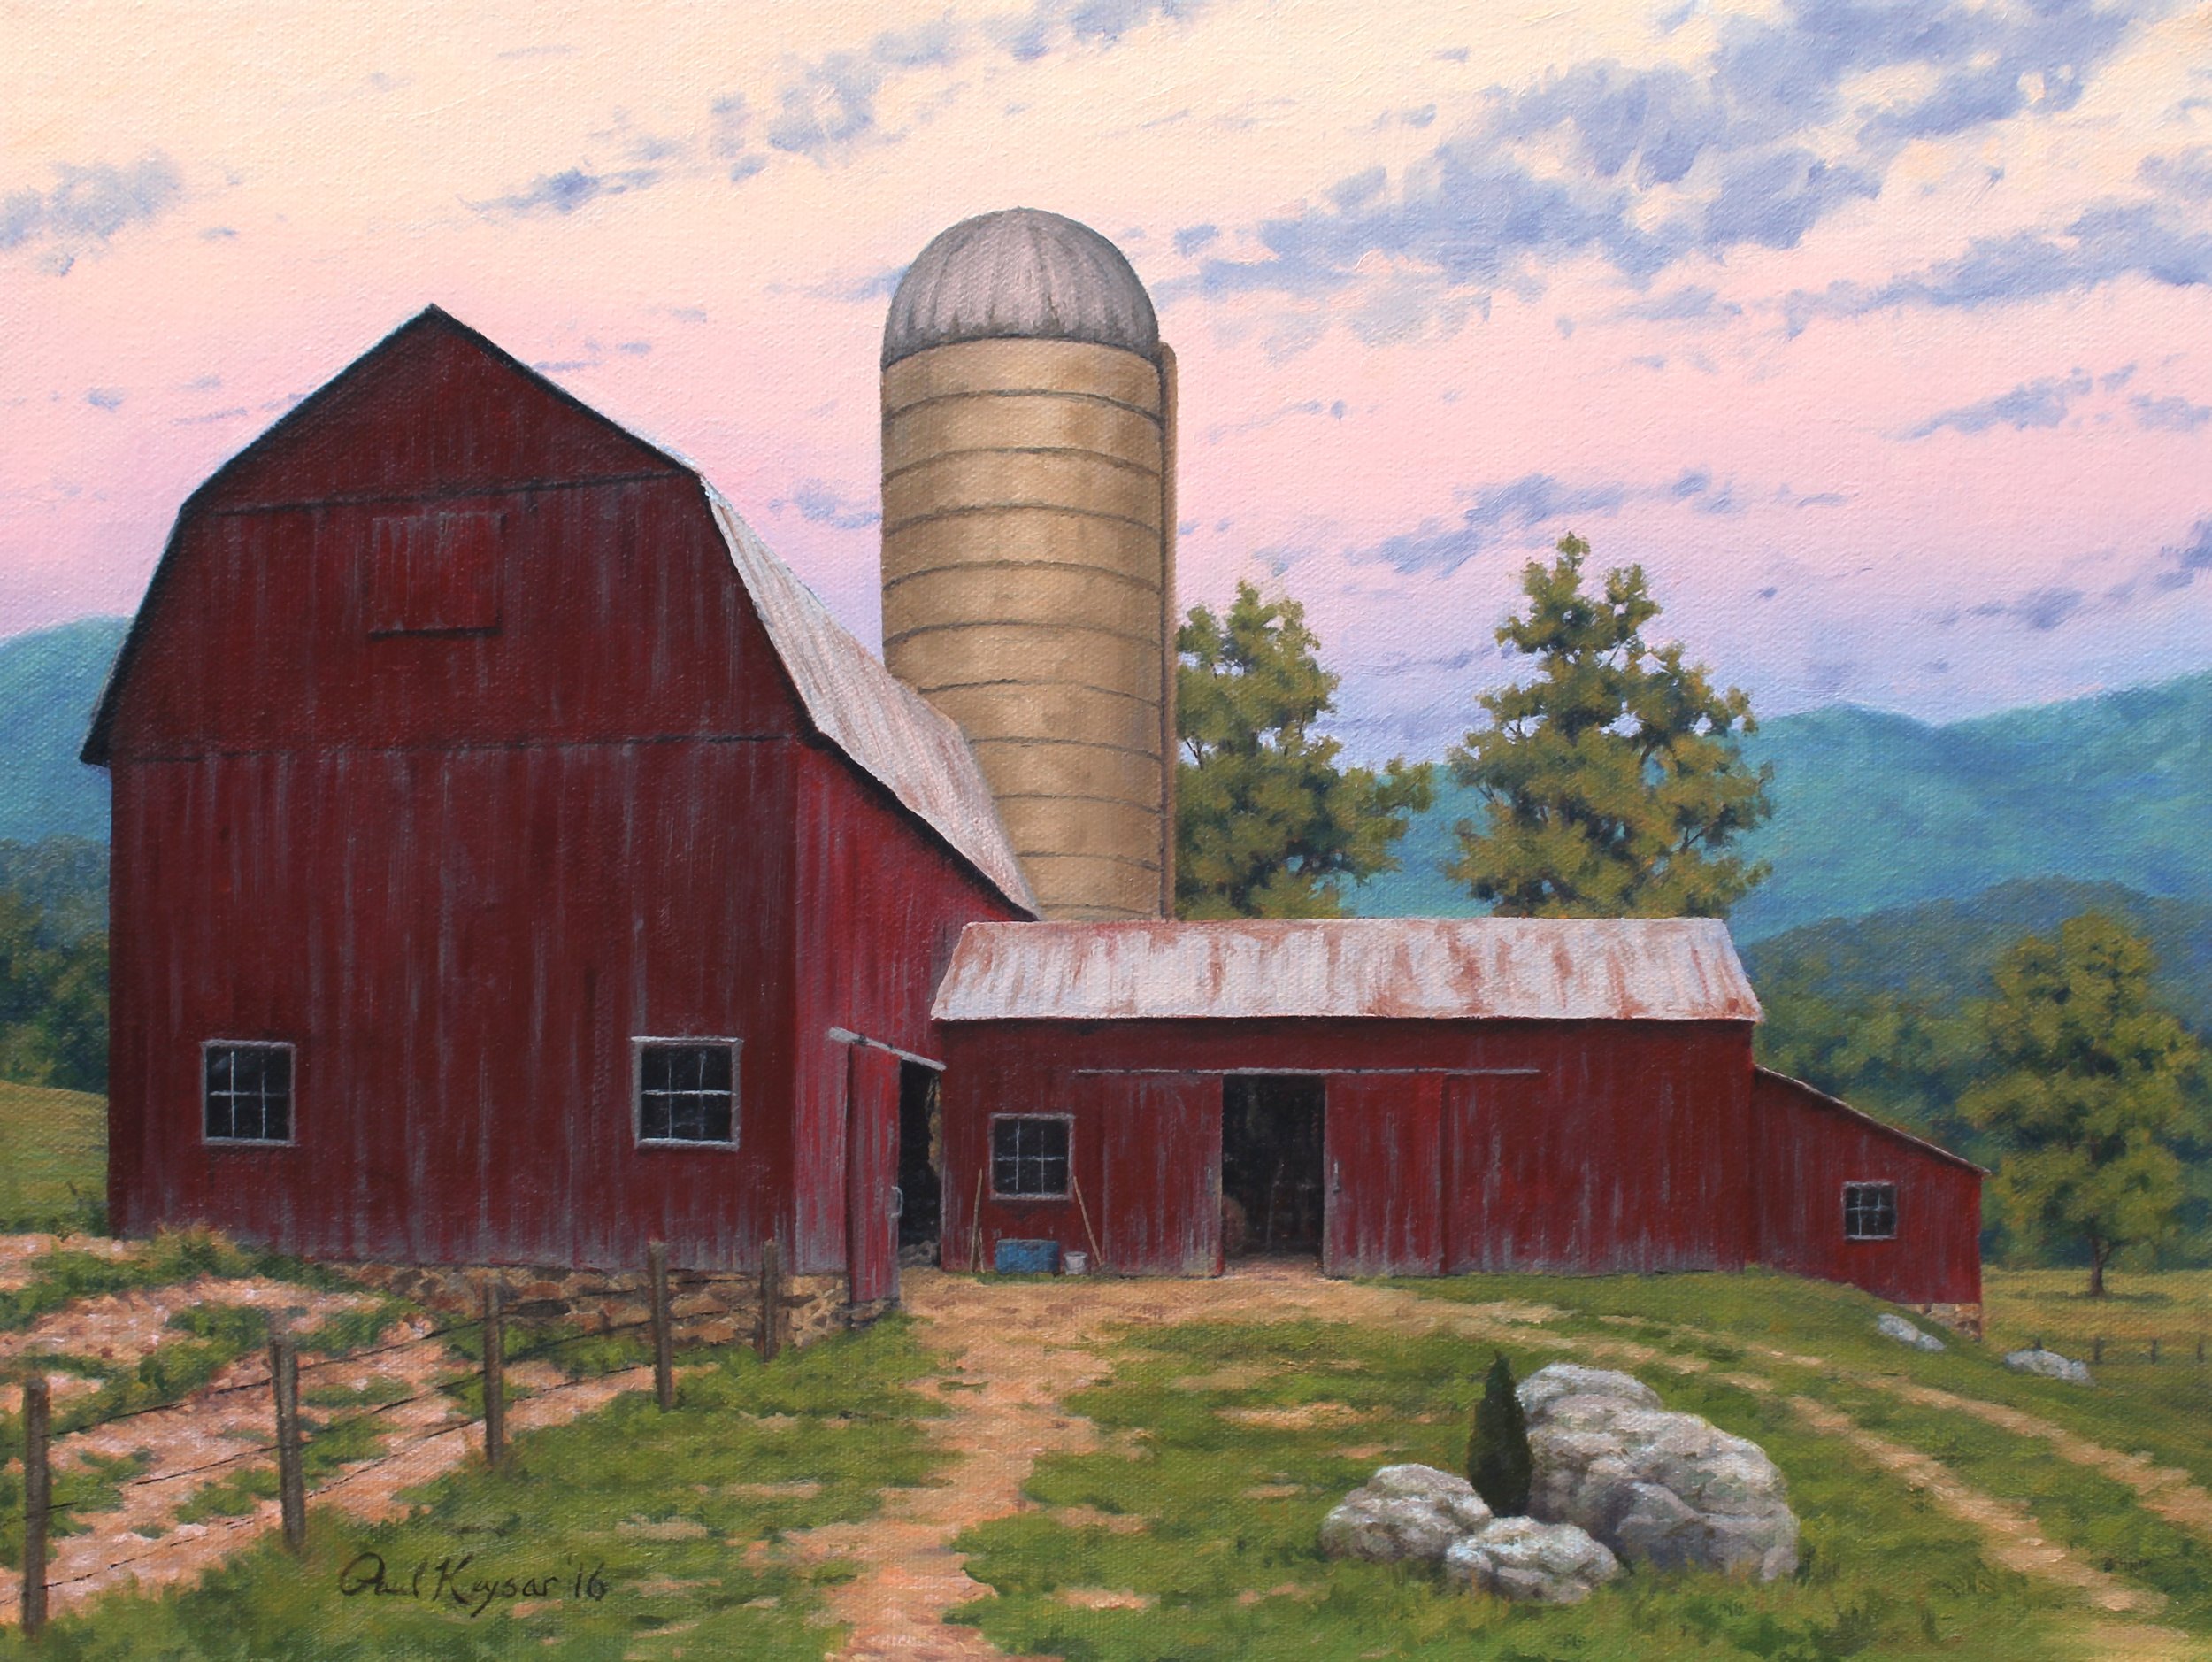 “The Old Barn at Sunset” 12x16” oil on canvas